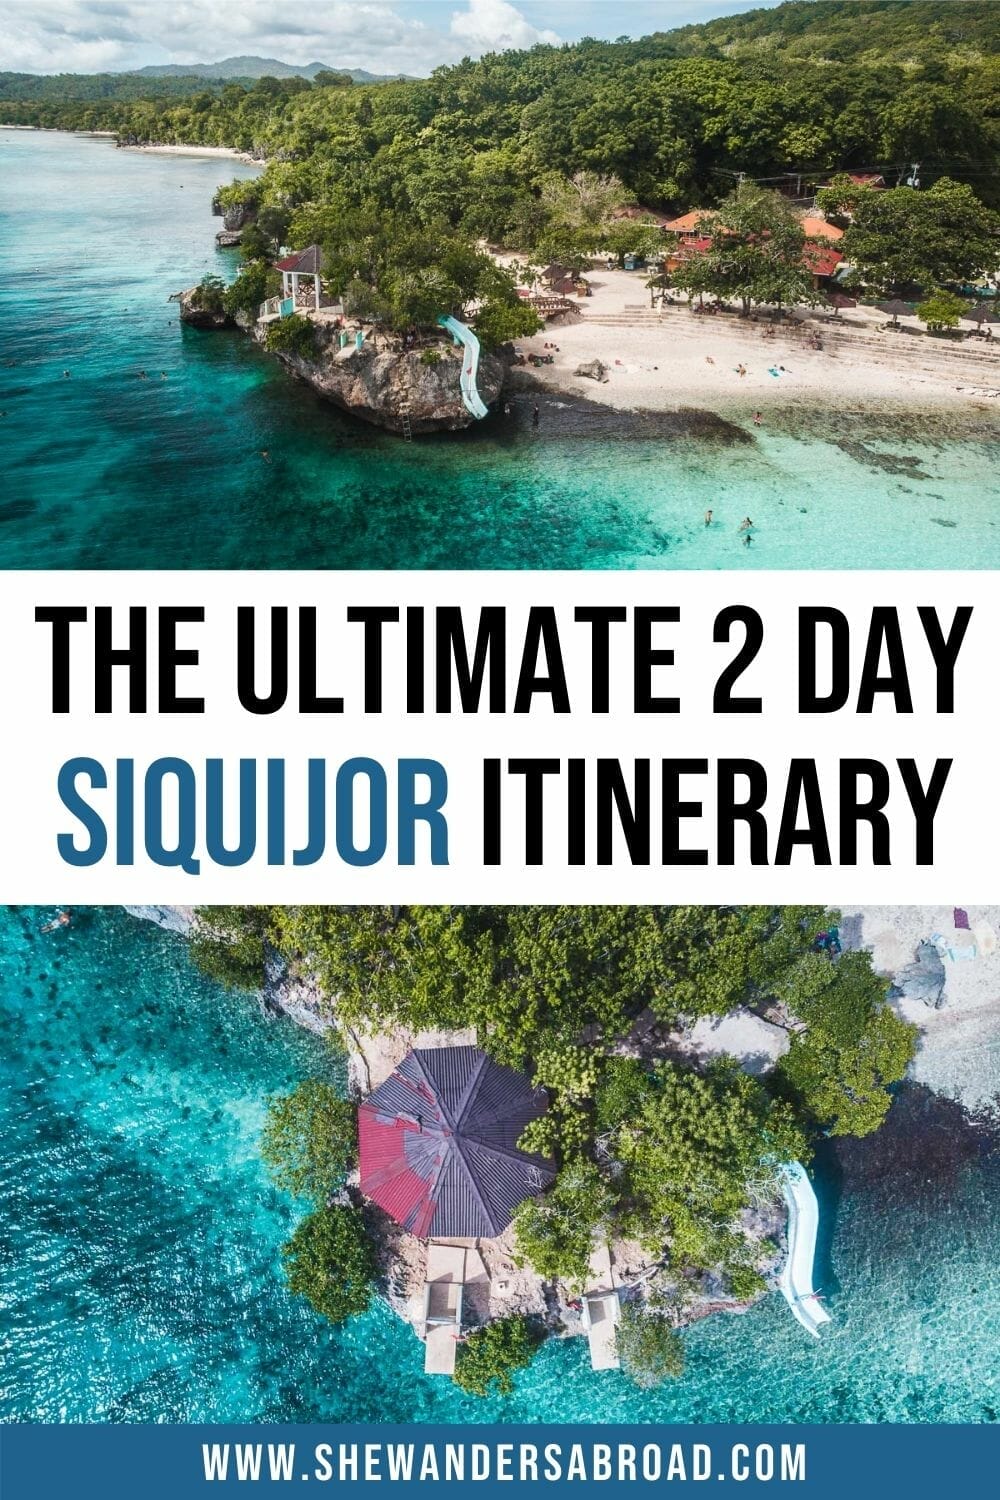 The Perfect Siquijor Itinerary: How to Spend 2 Days in Siquijor